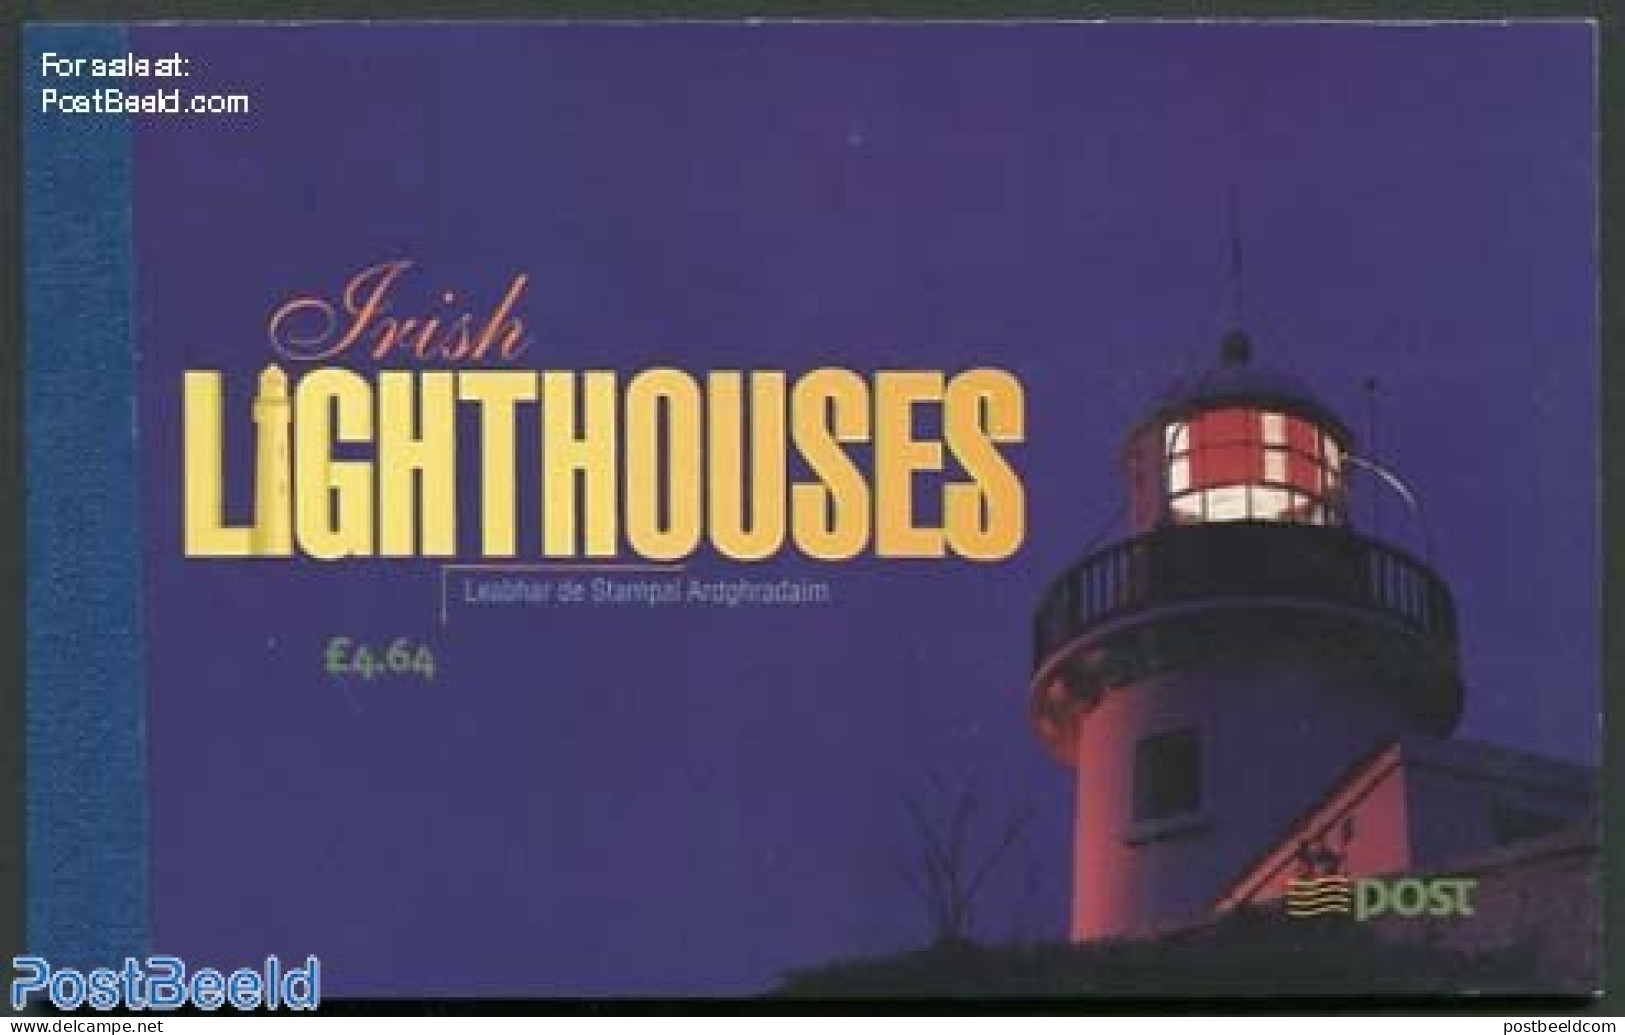 Ireland 1997 Lighthouses Booklet, Mint NH, Various - Stamp Booklets - Lighthouses & Safety At Sea - Unused Stamps